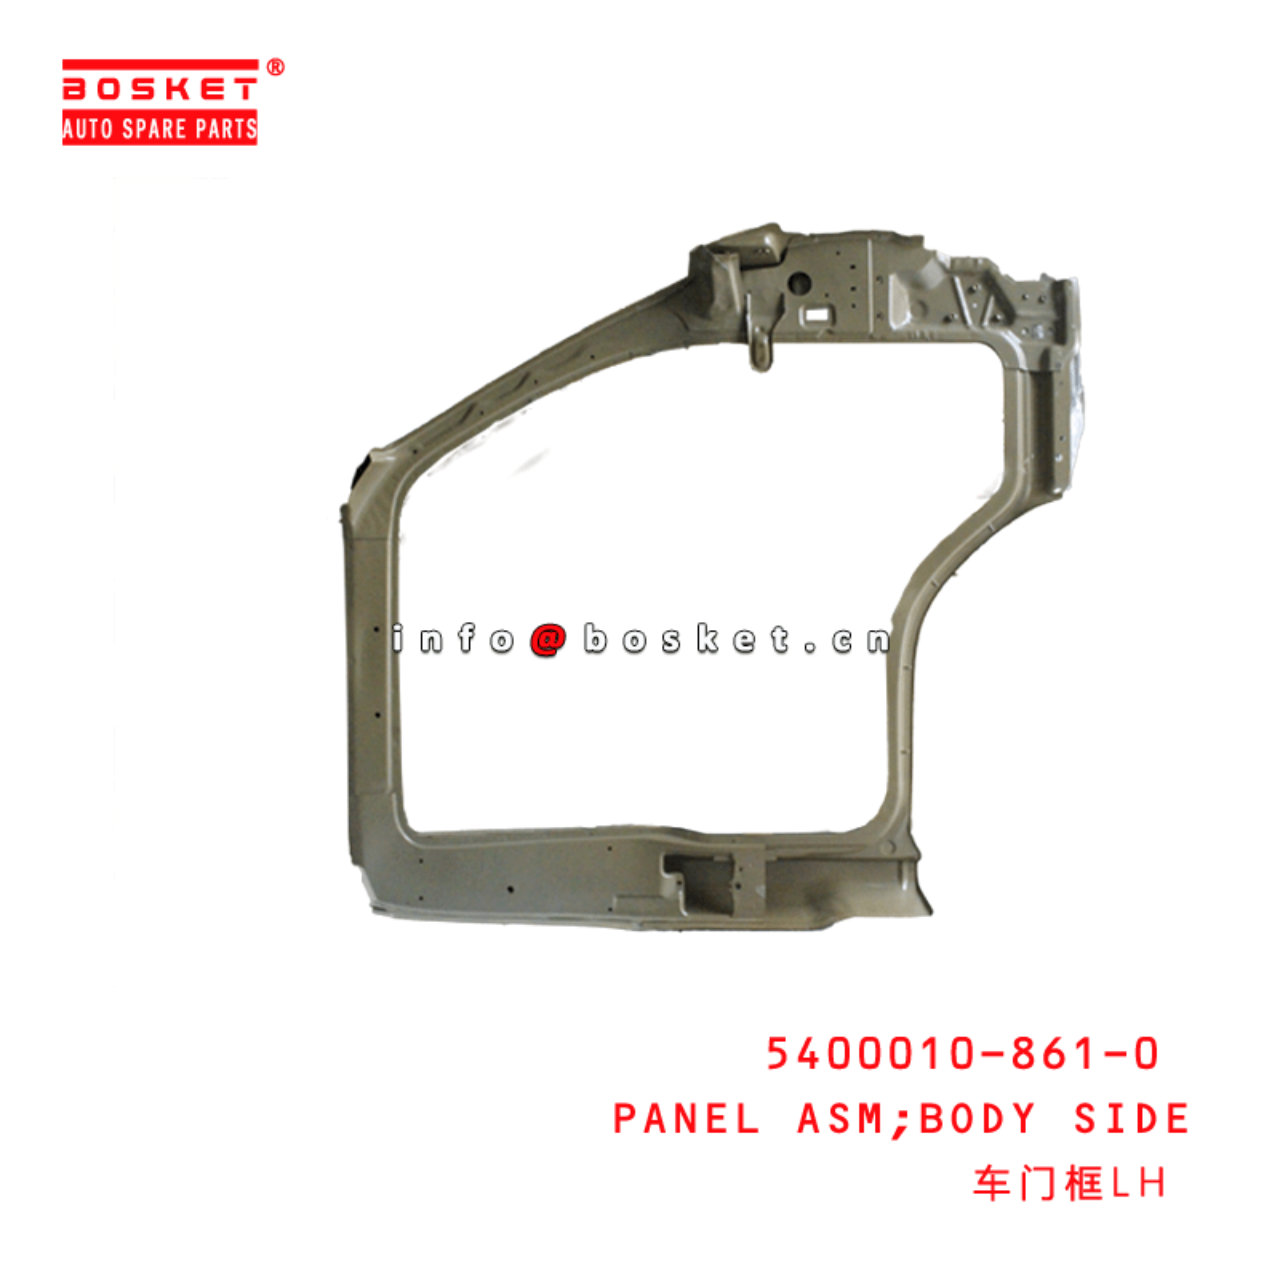  5400010-861-0 Body Side Panel Assembly 54000108610 Suitable for ISUZU 600P